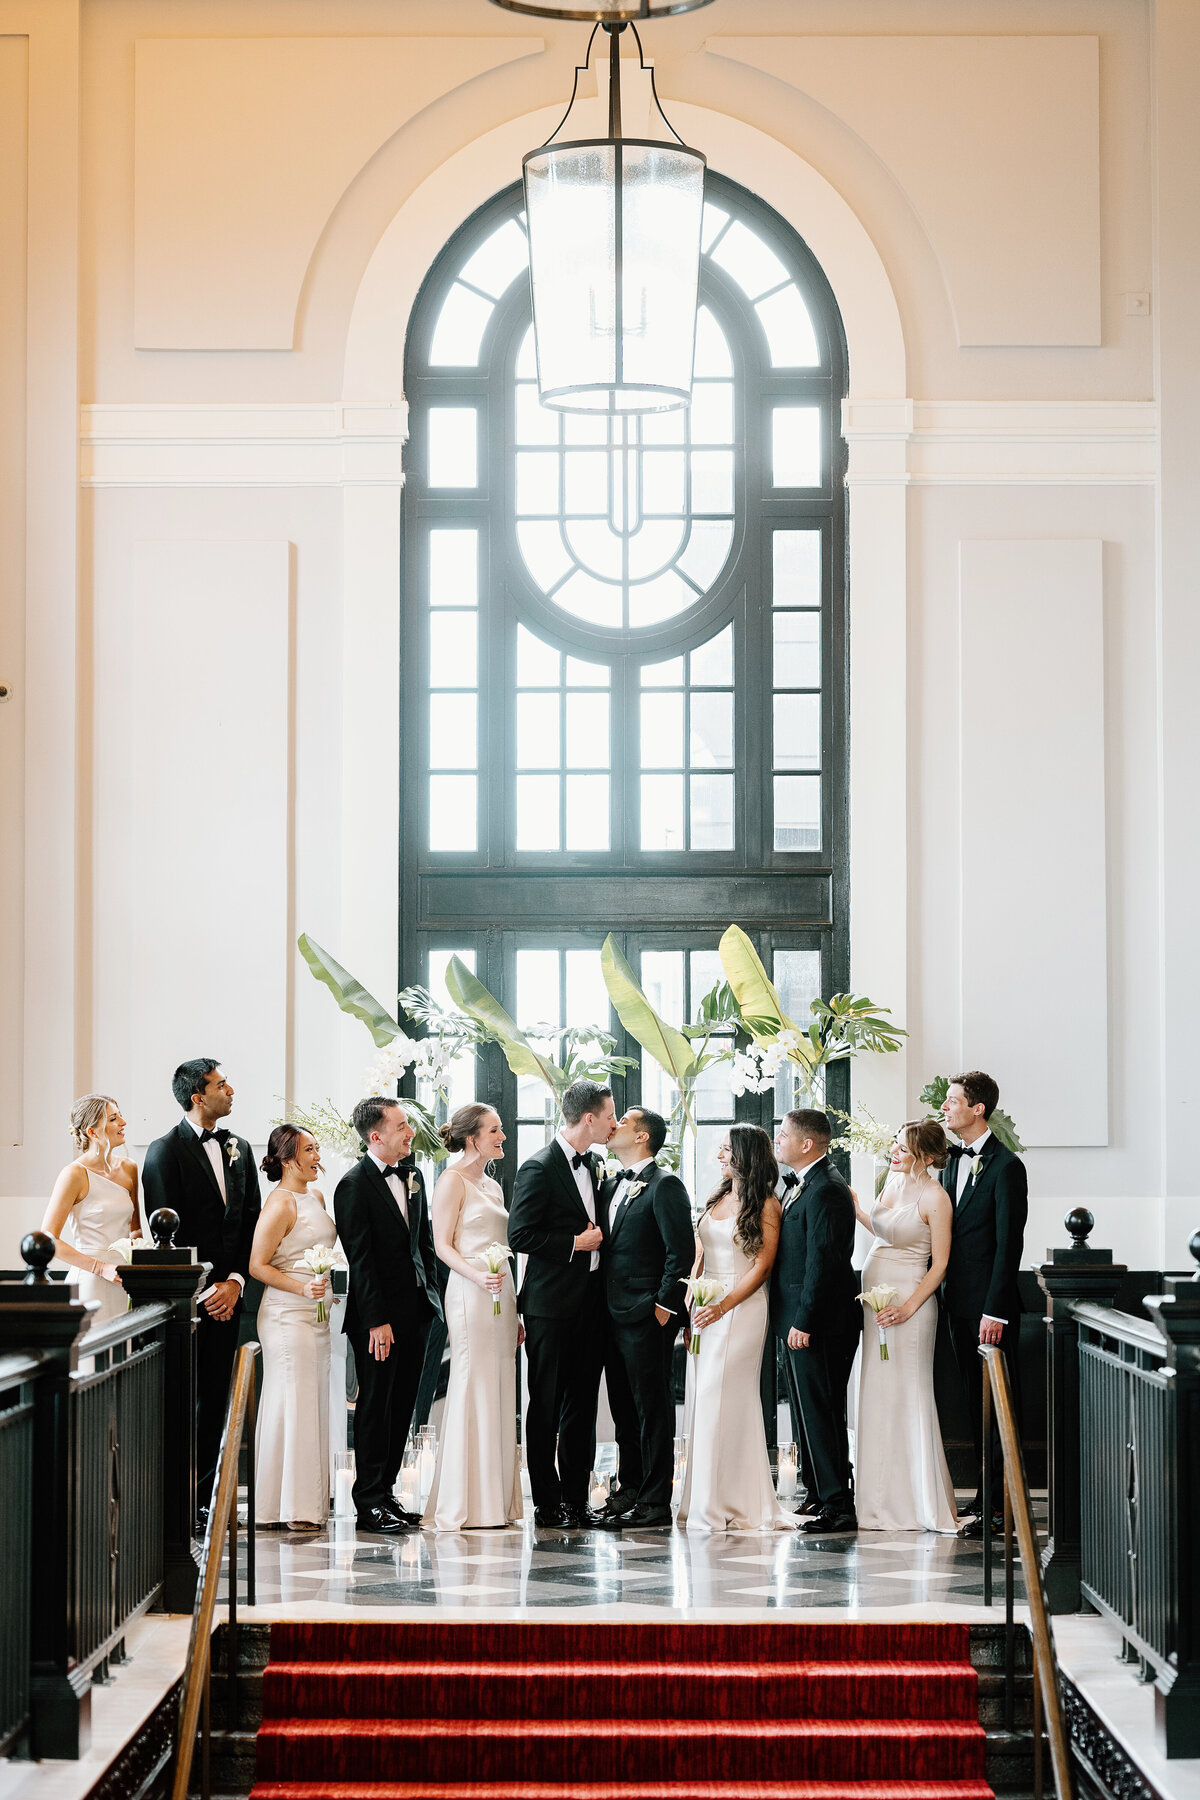 Wedding ceremony in a grand hall